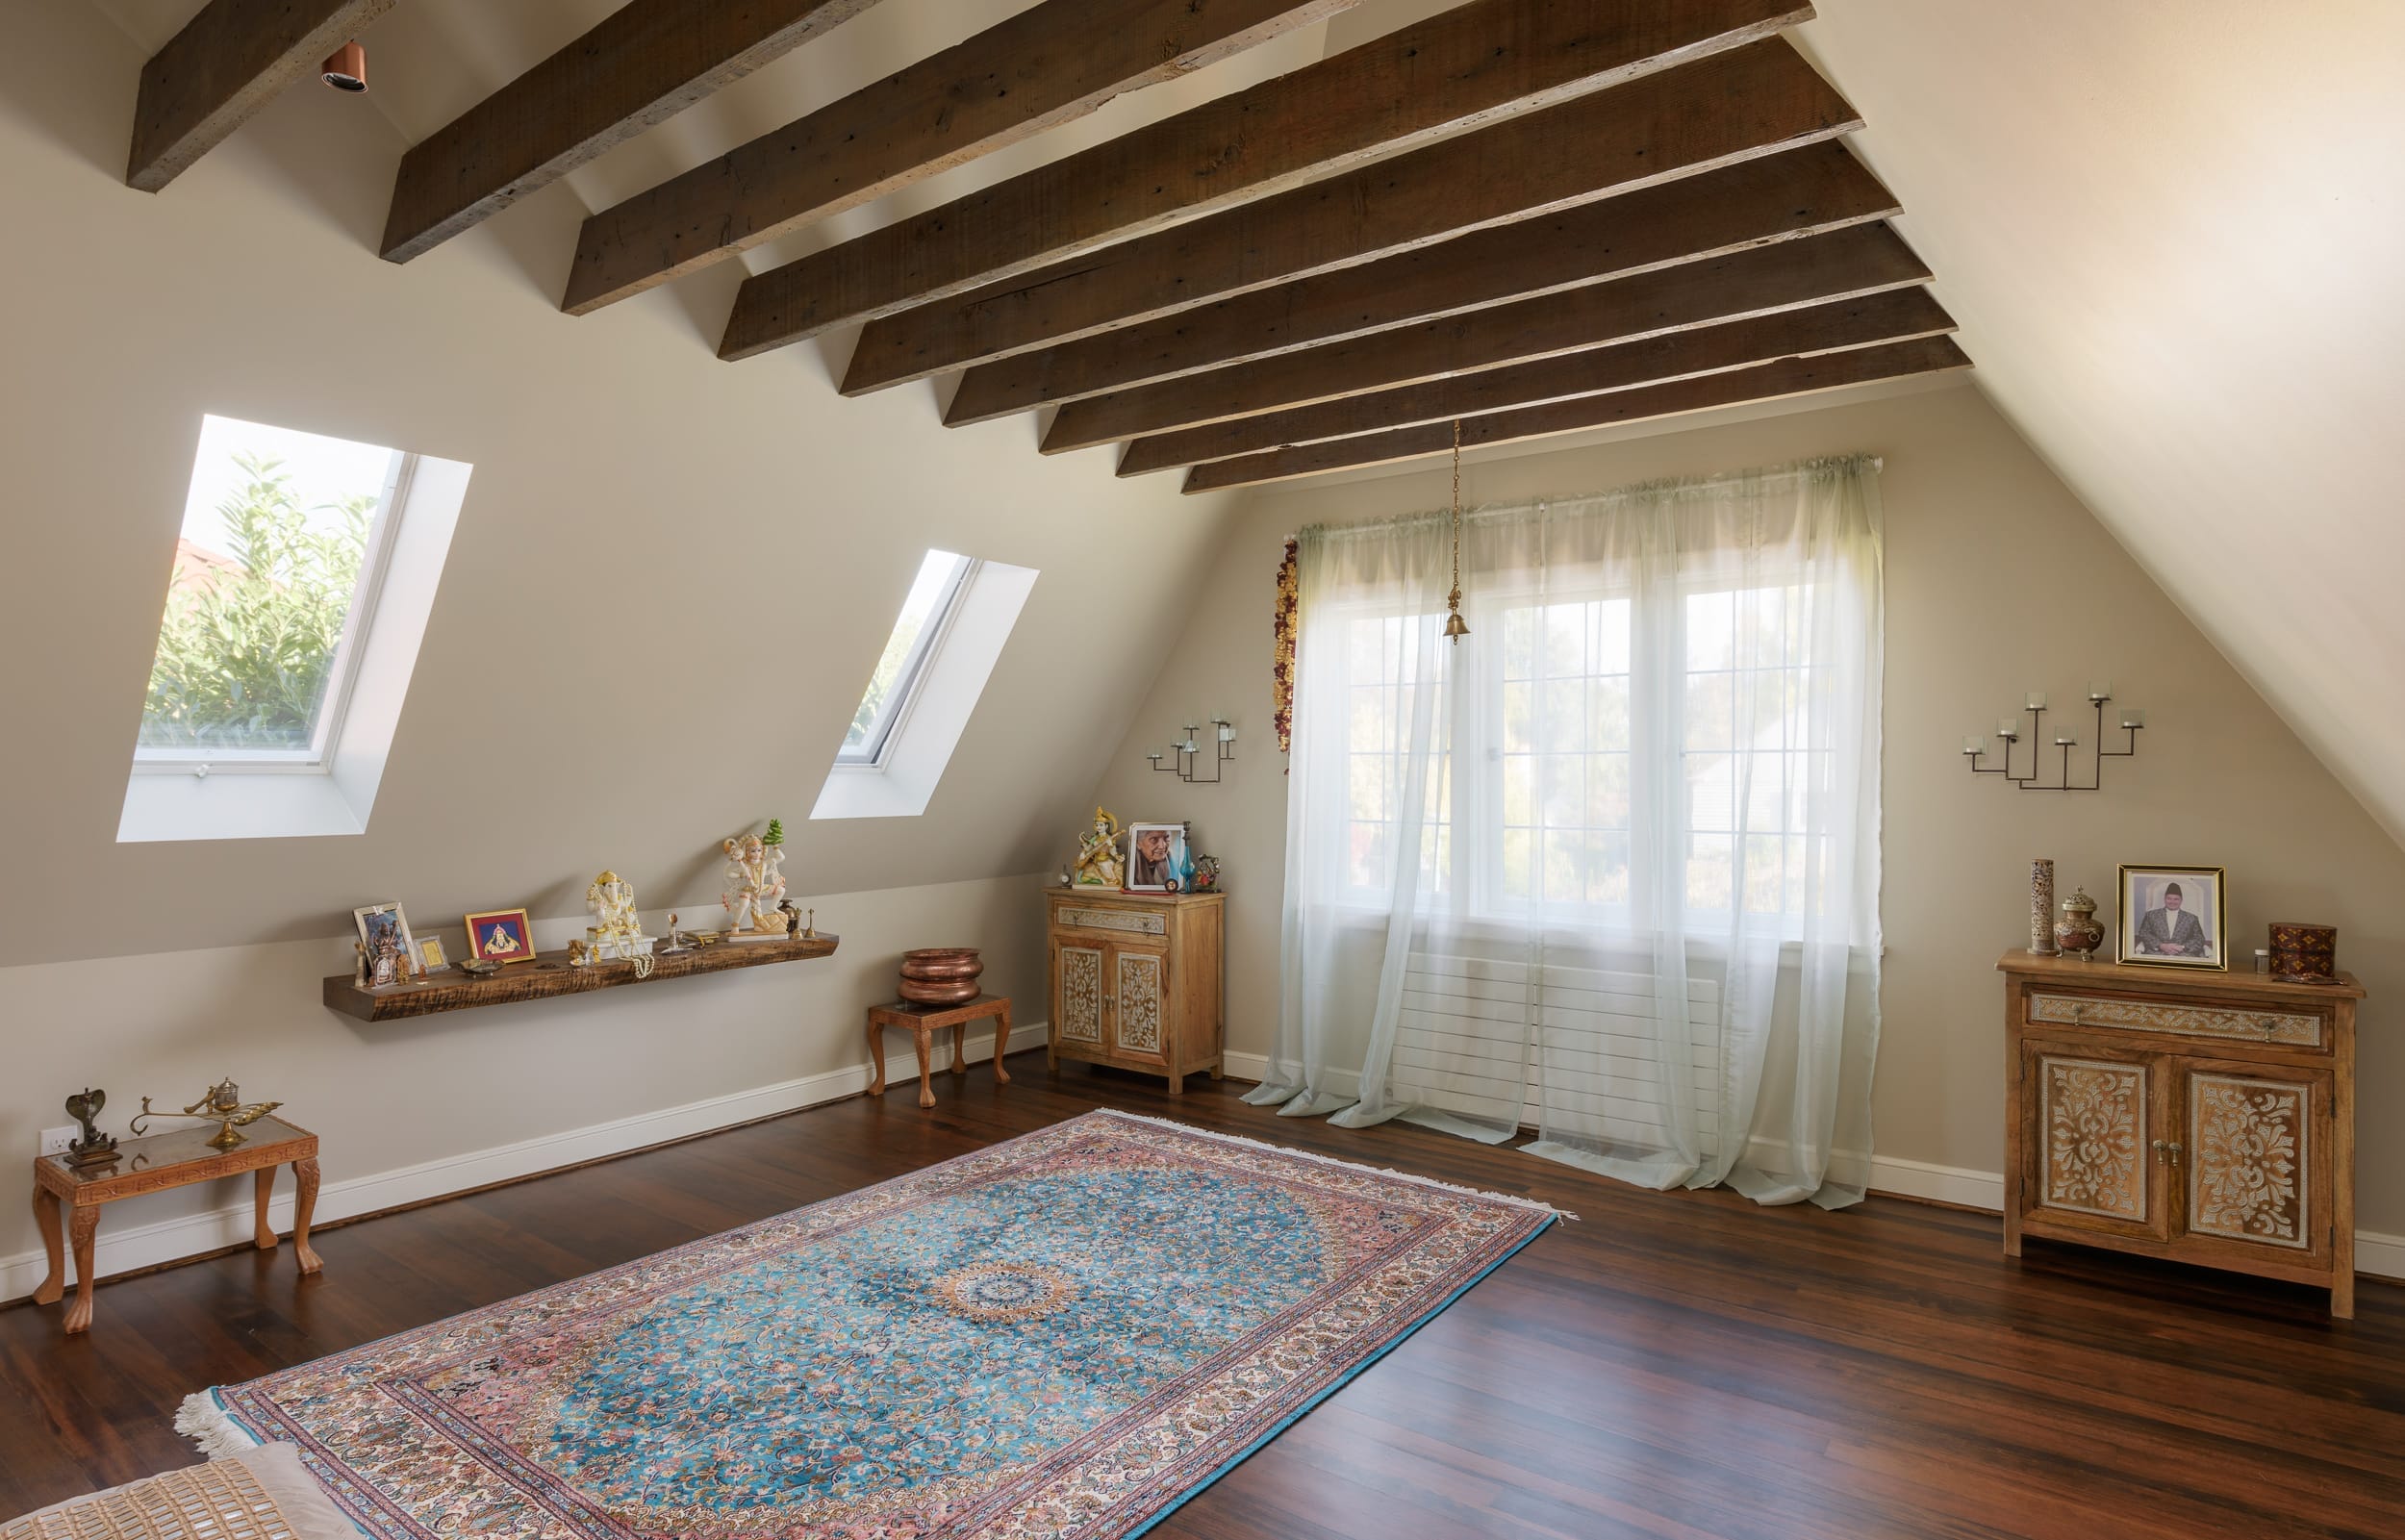 An attic room with wooden beams and a rug.